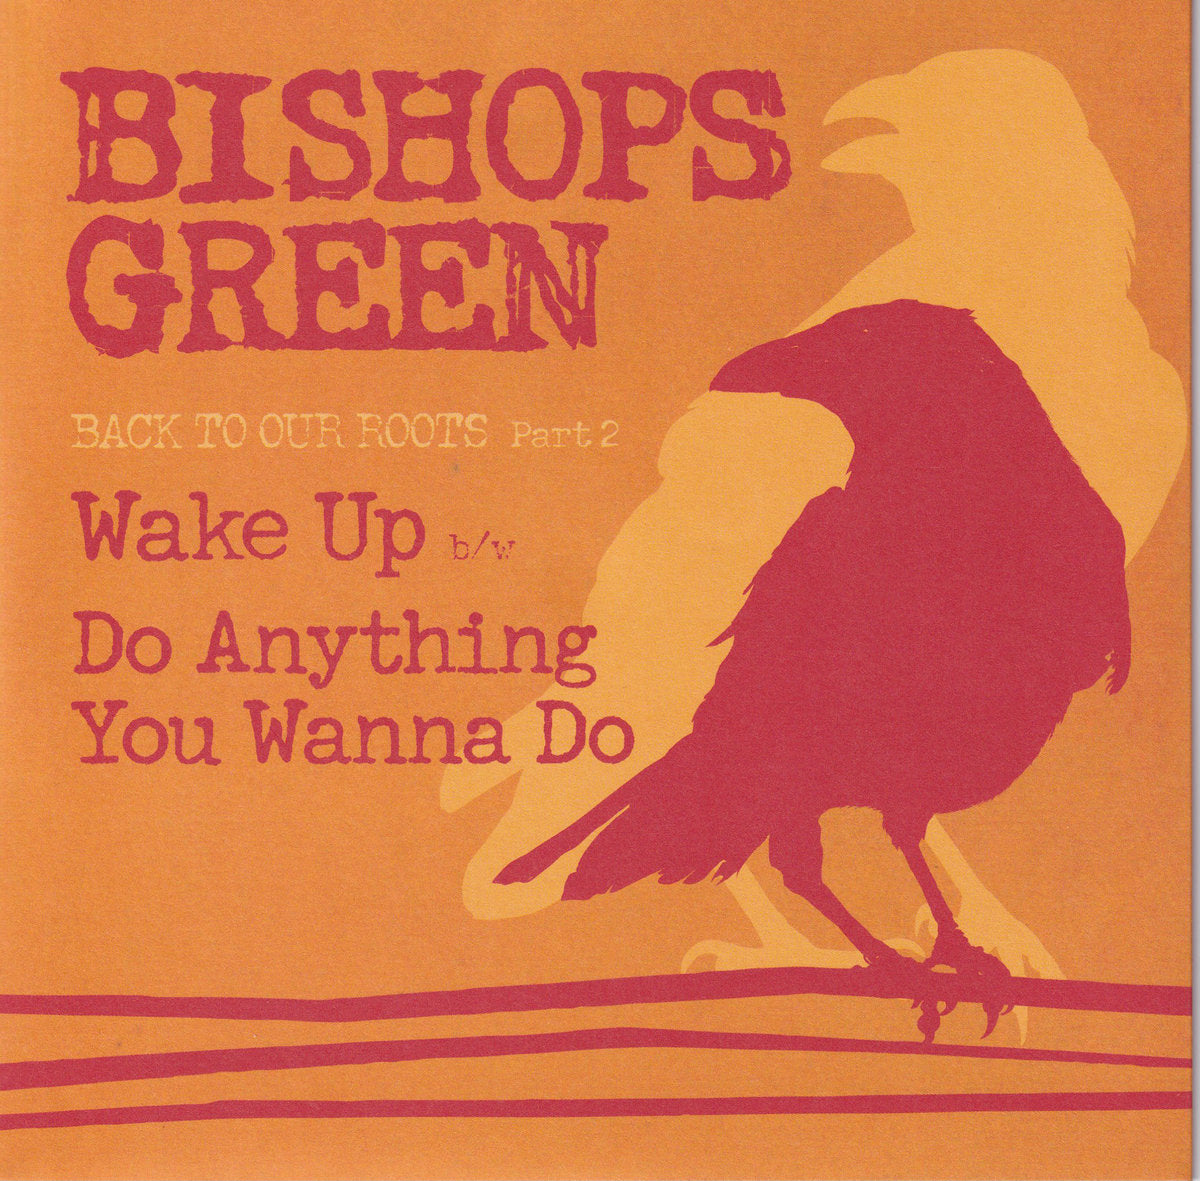 Bishops Green - "Back To Our Roots Part 2" 7-inch